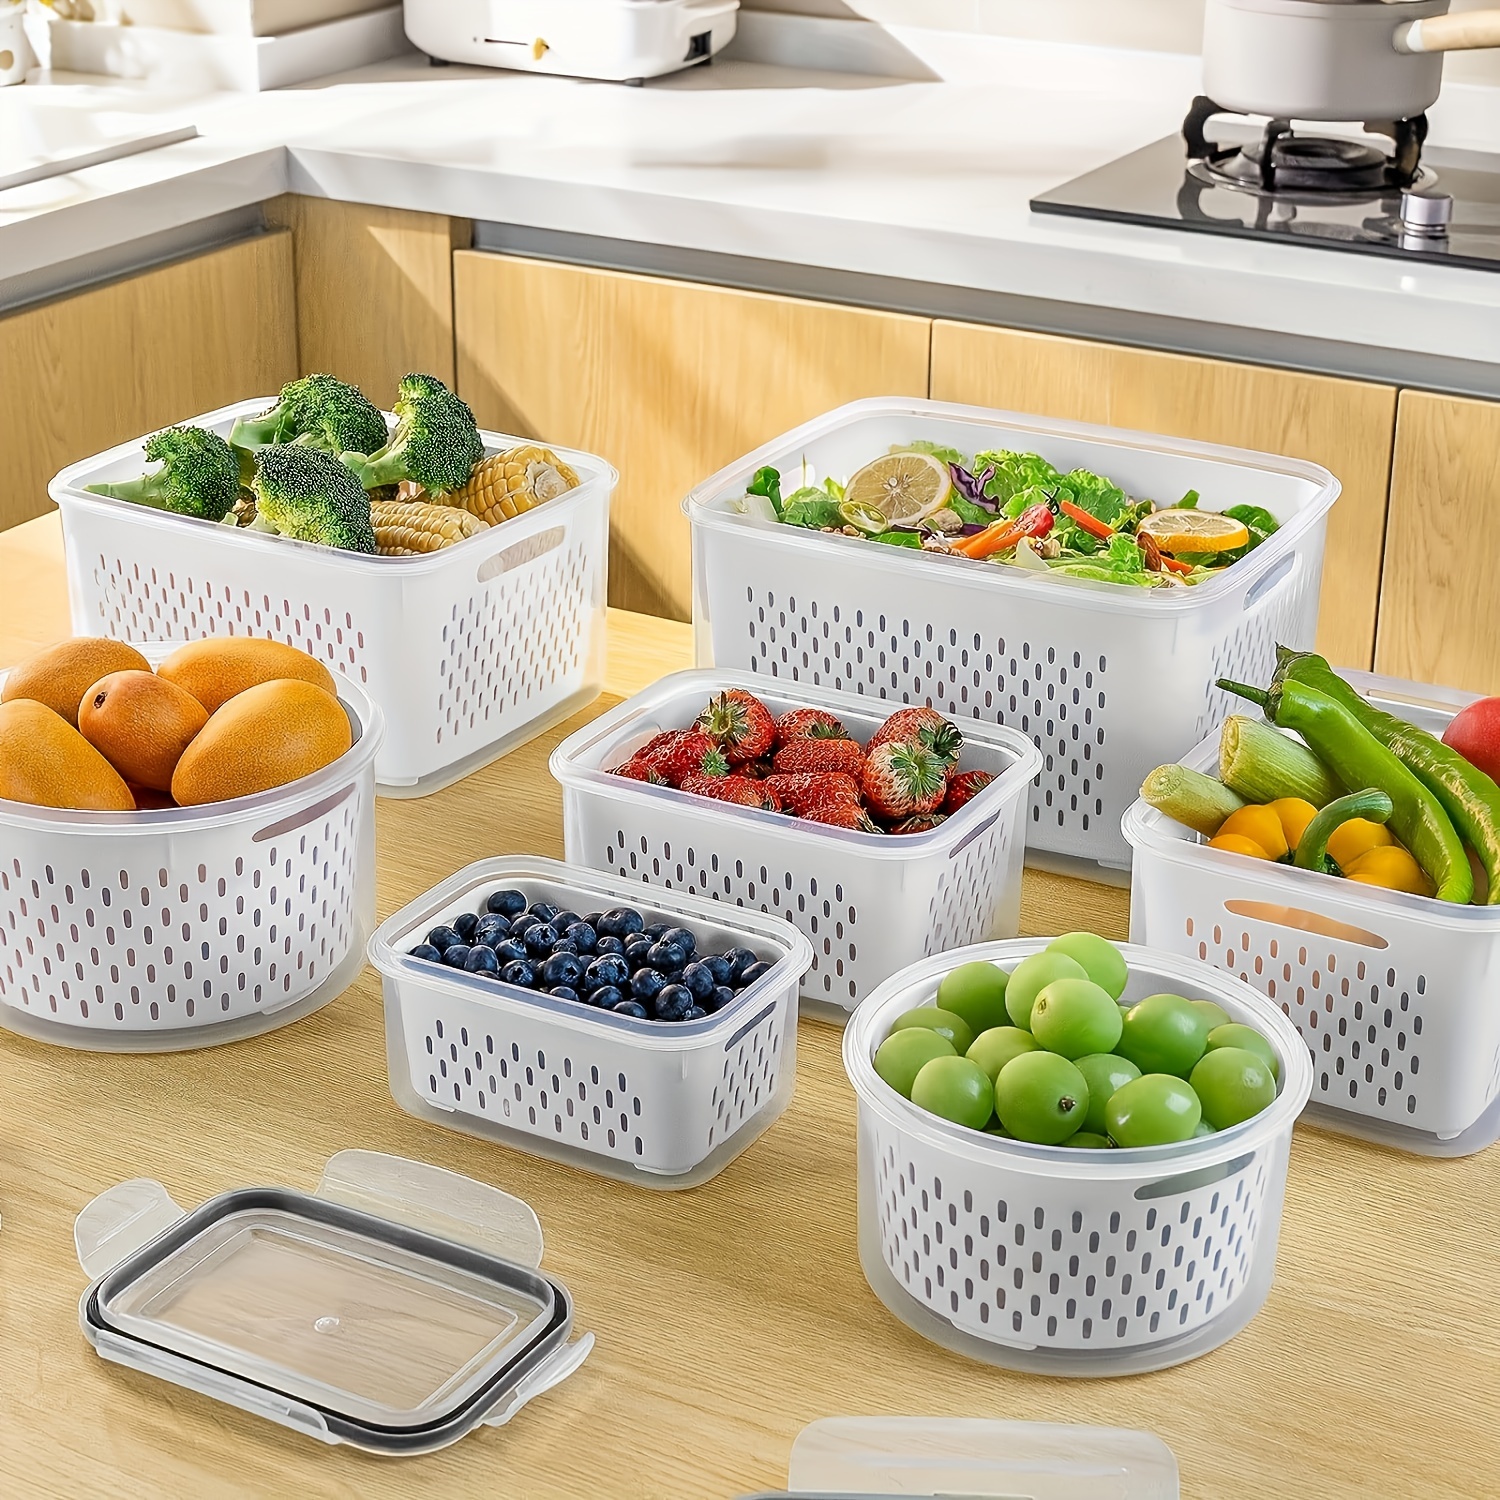 Containers for fruit and vegetables